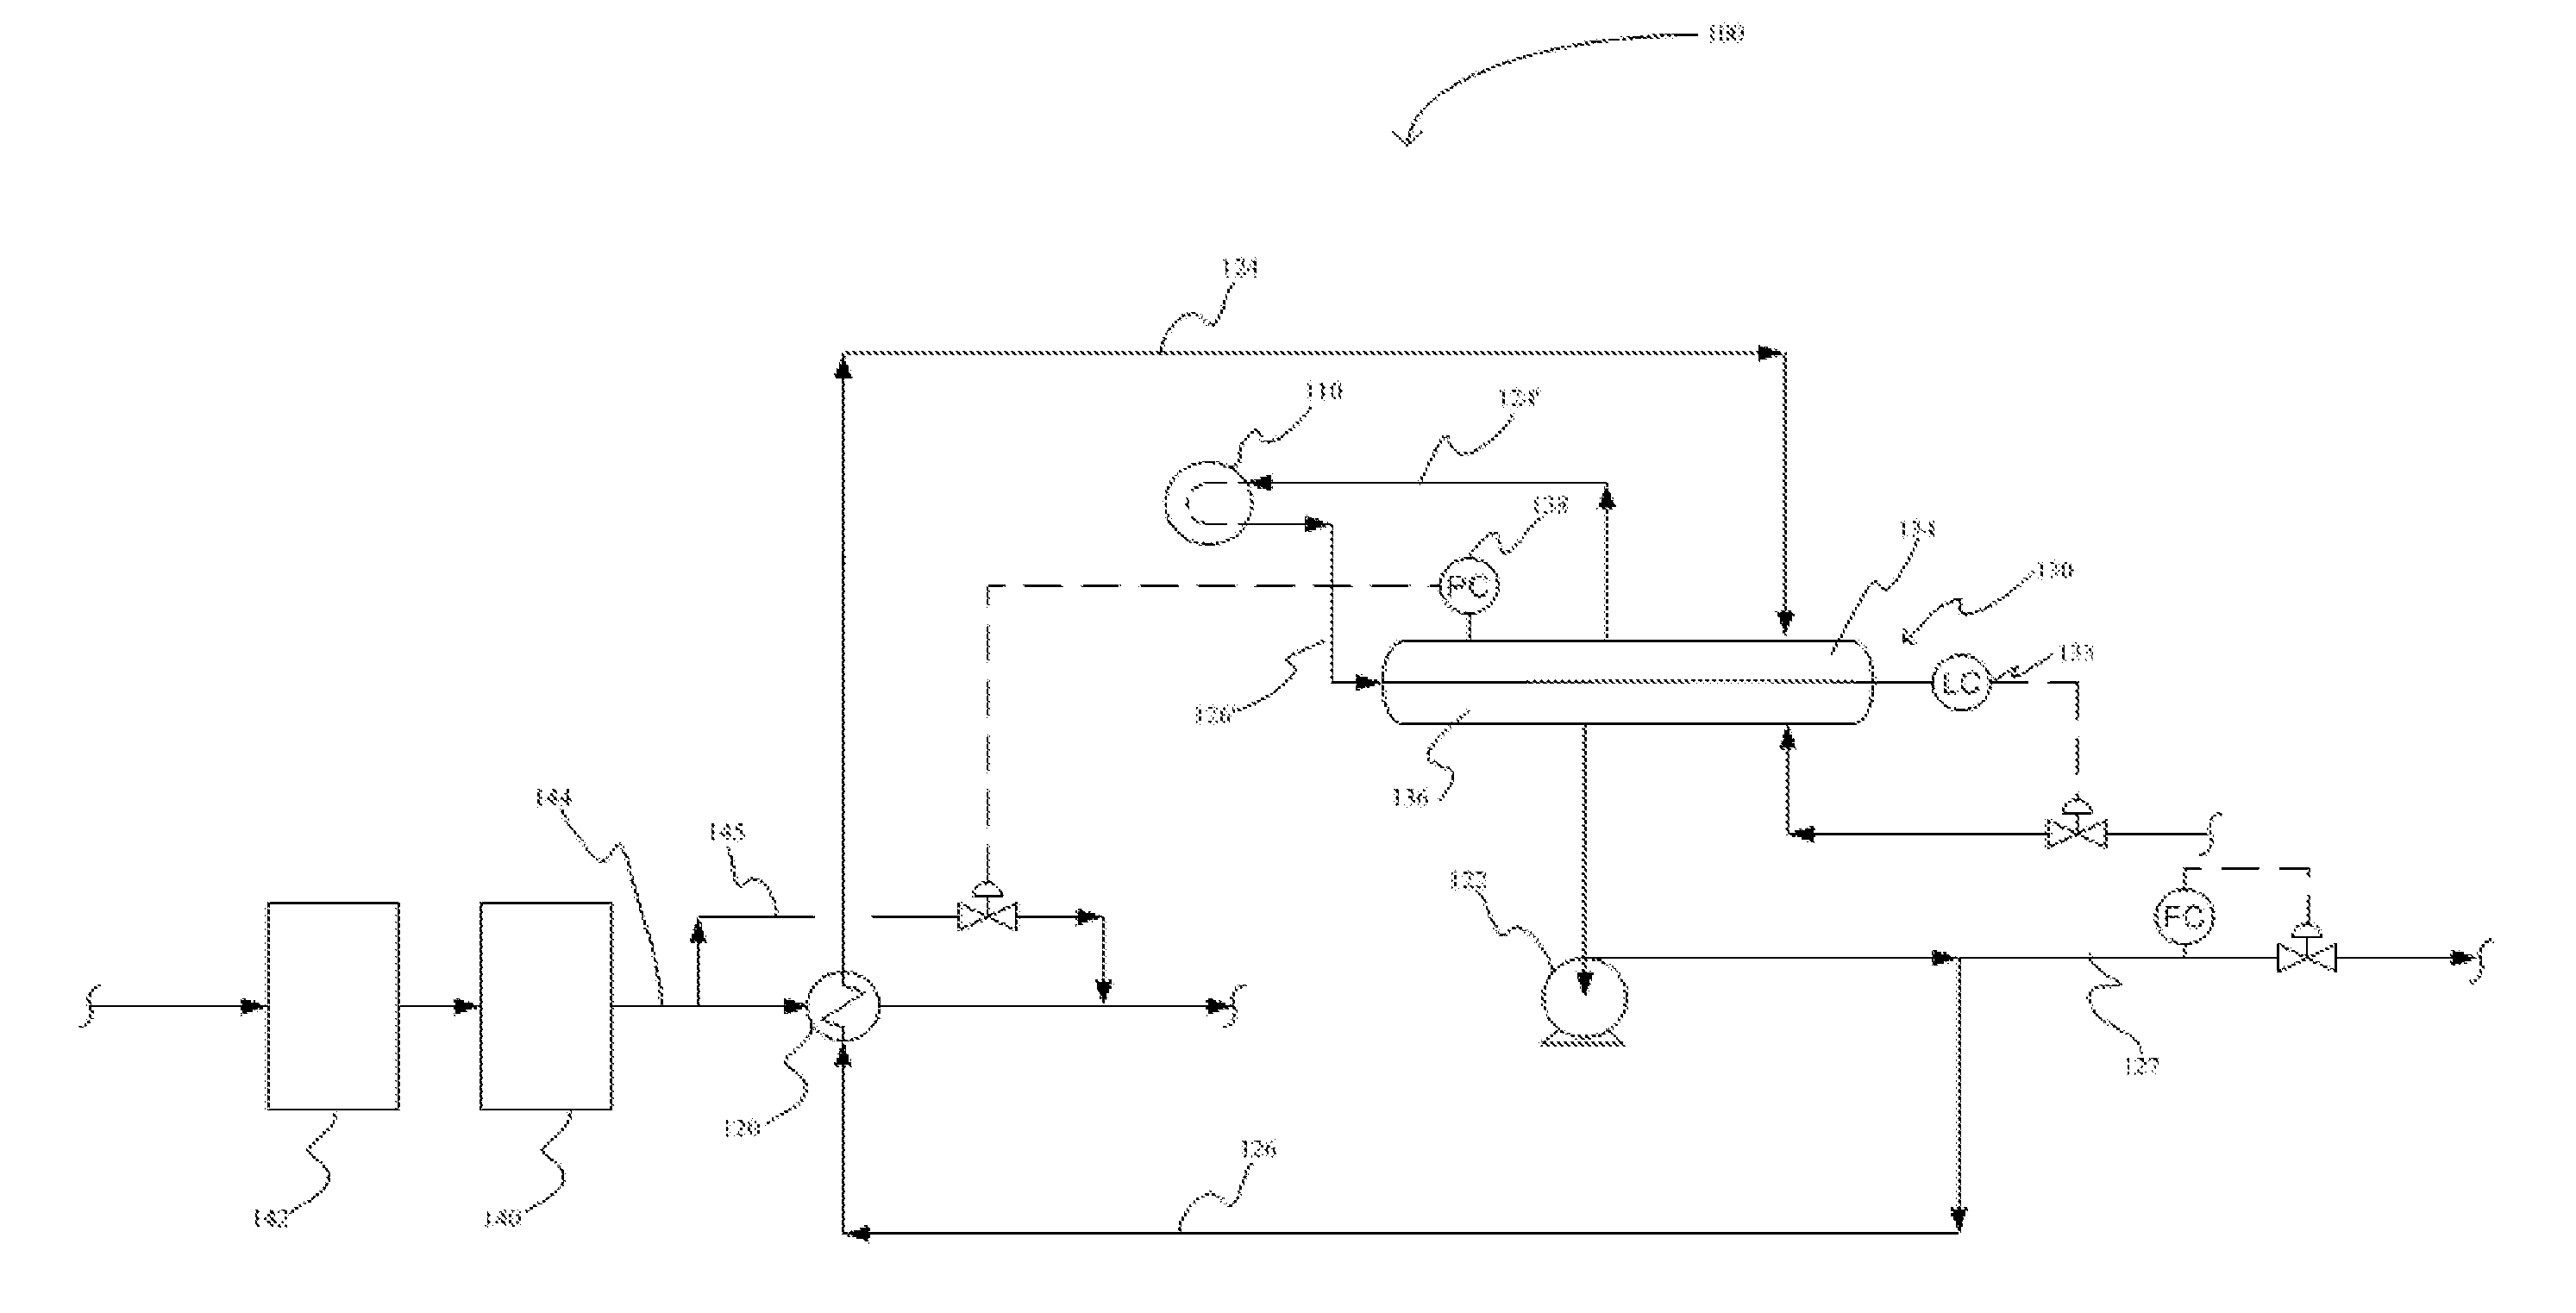 Configurations and methods of generating low-pressure steam